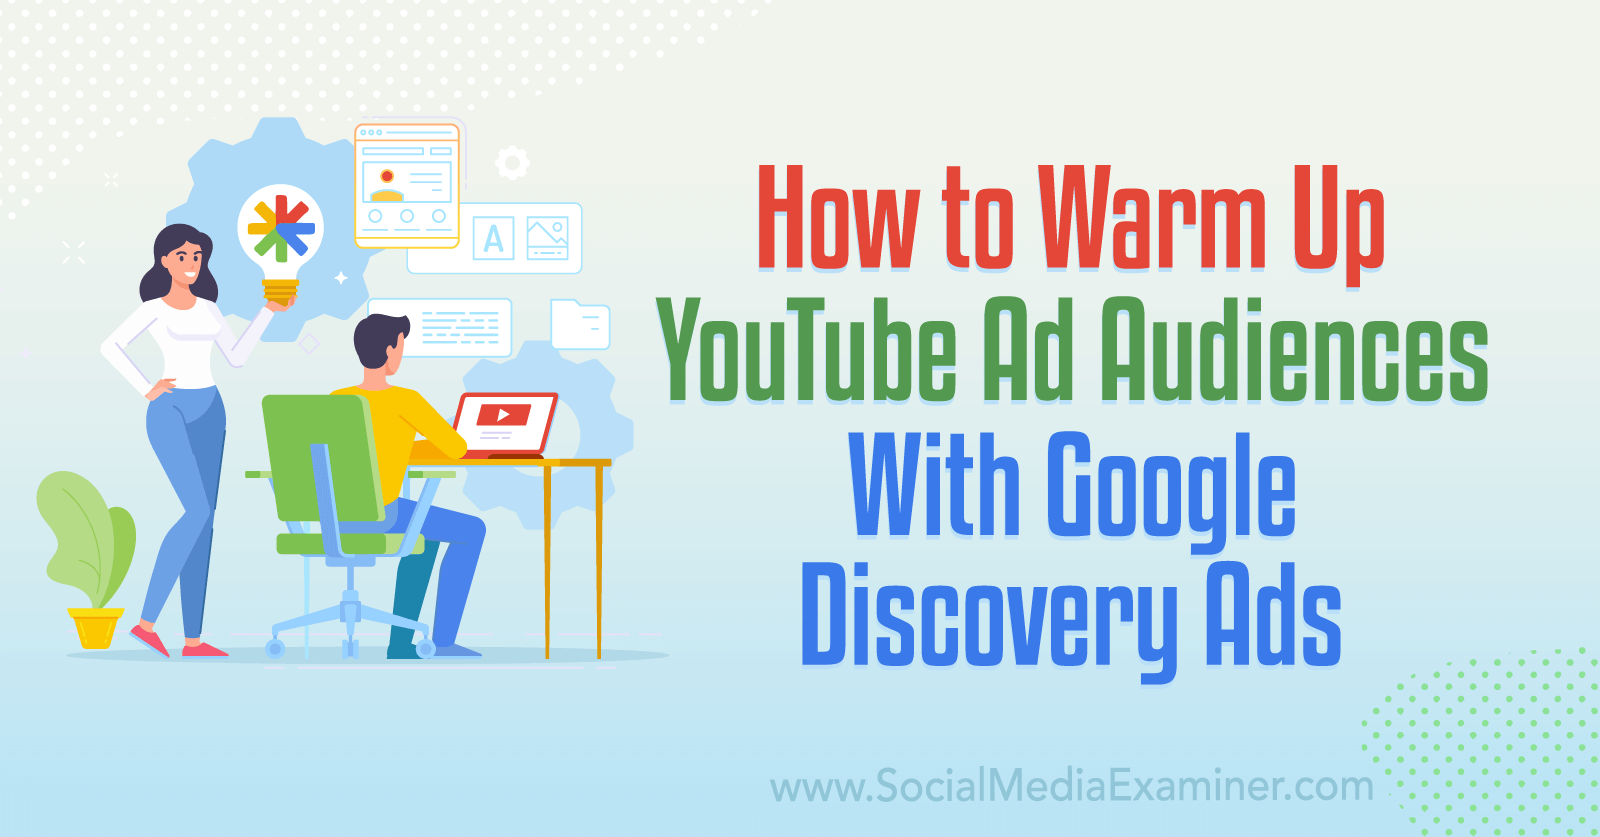 How to Warm Up YouTube Ads Audiences With Google Discovery Ads by Social Media Examiner